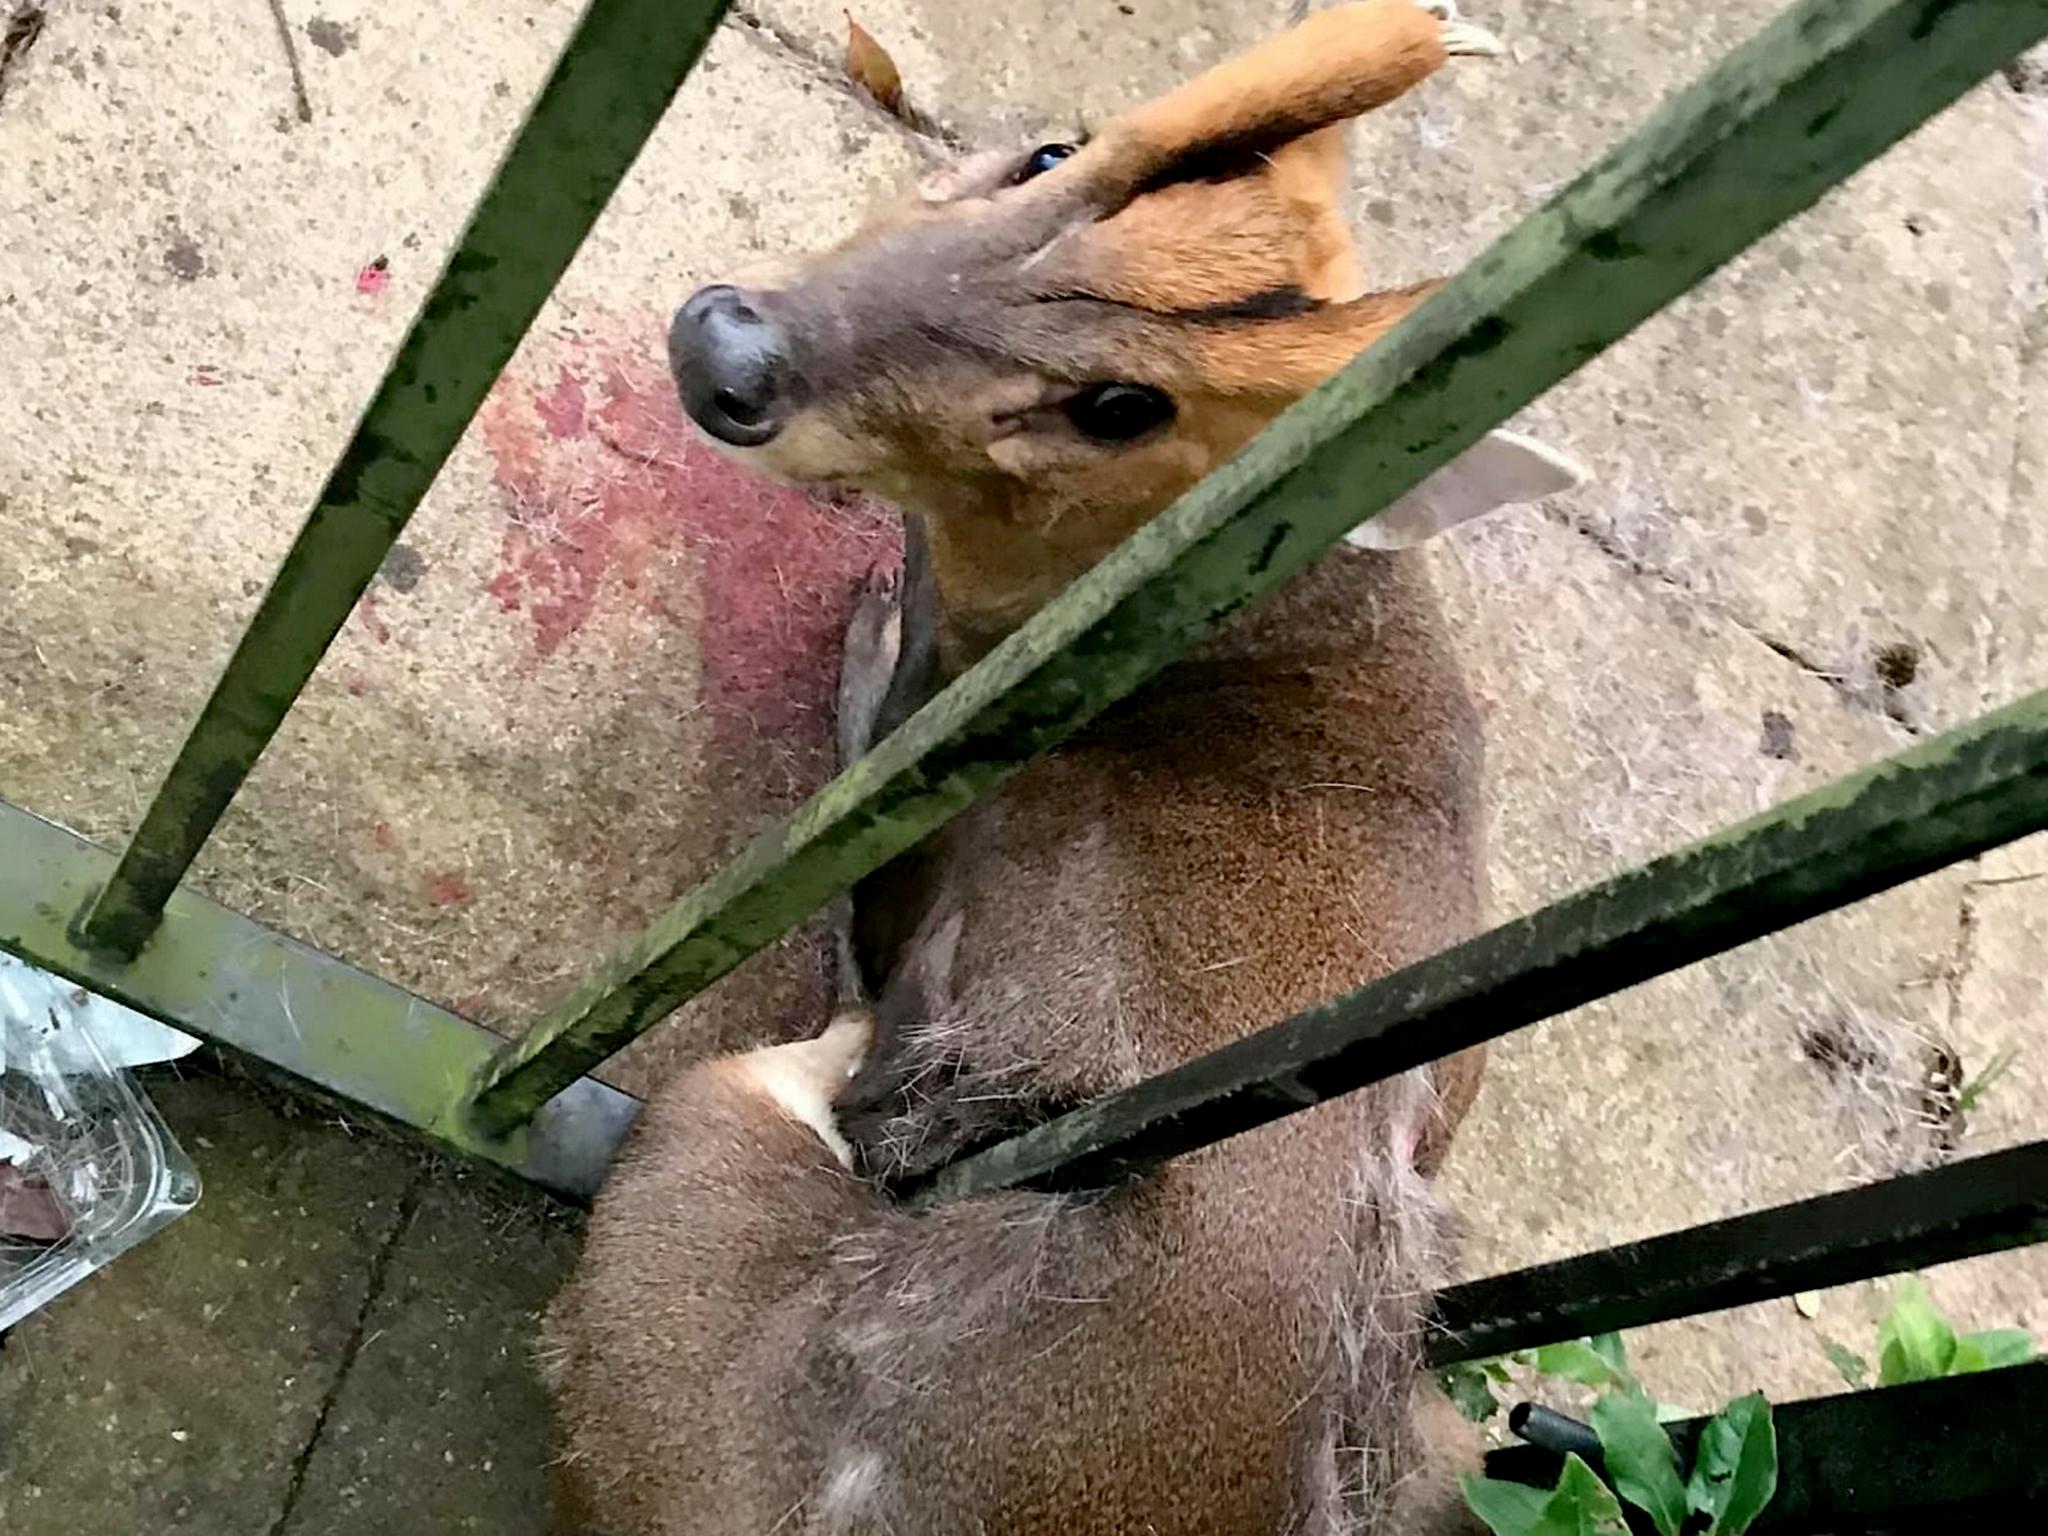 The deer had sustained injuries in the process of becoming trapped